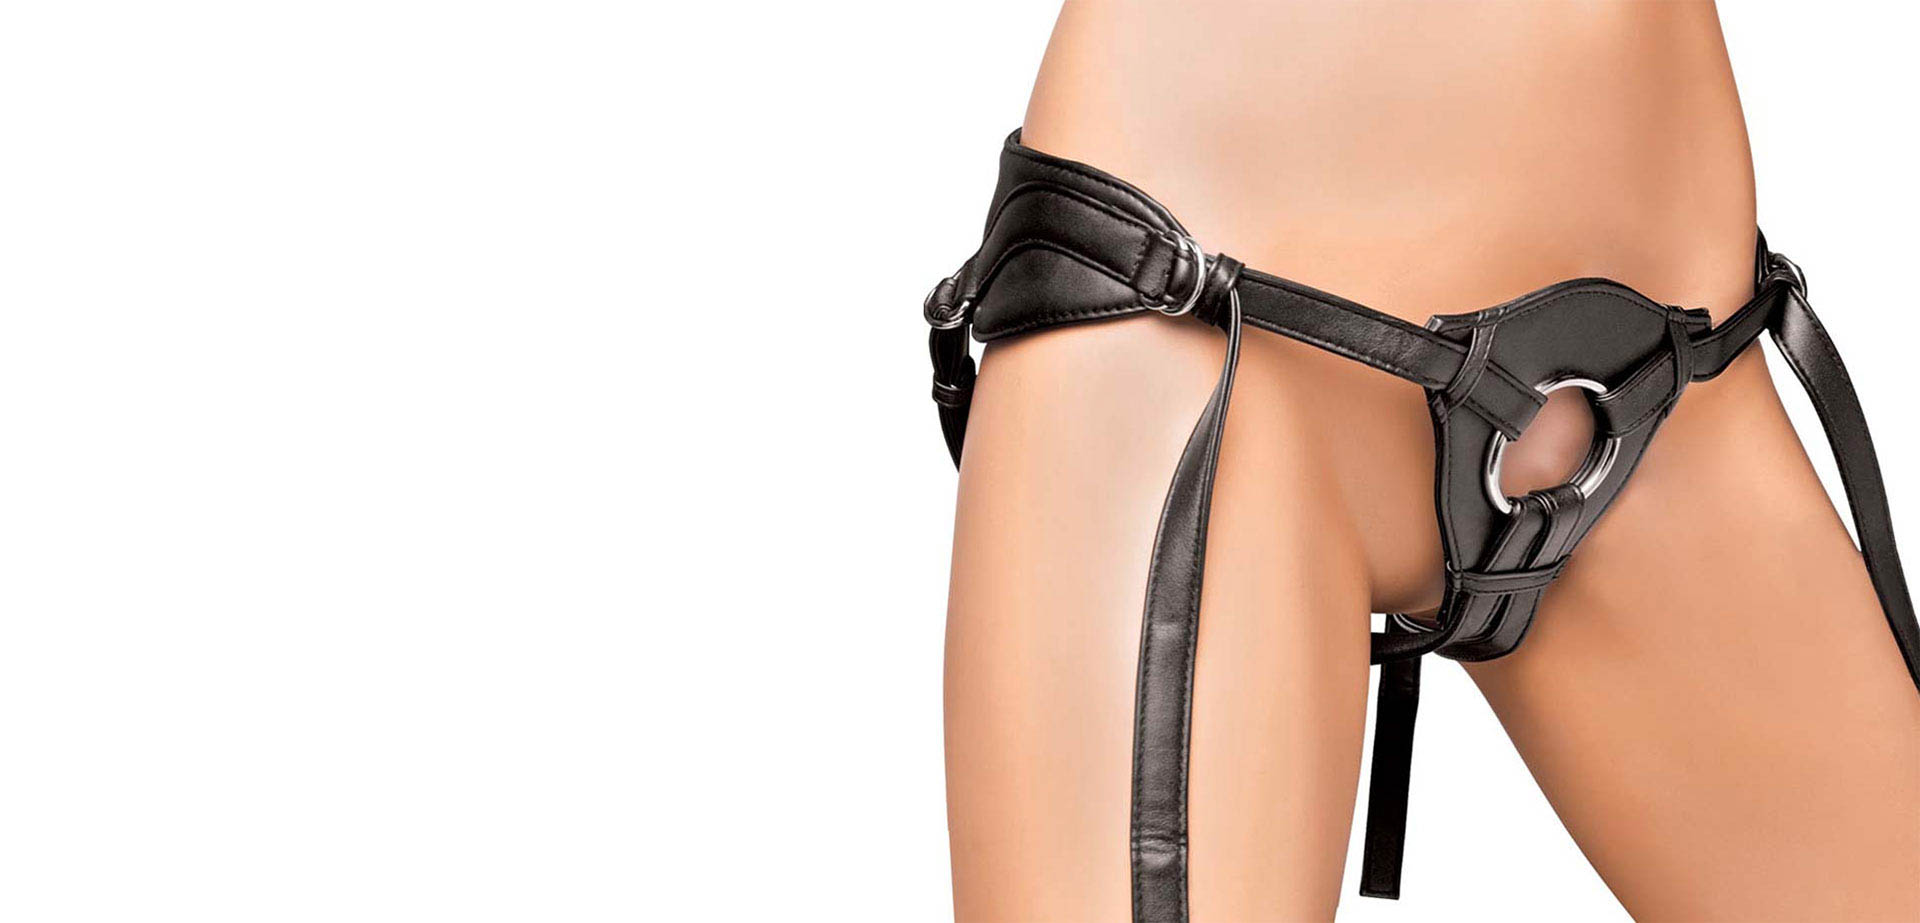 Lux fetish patent leather strap-on harness.